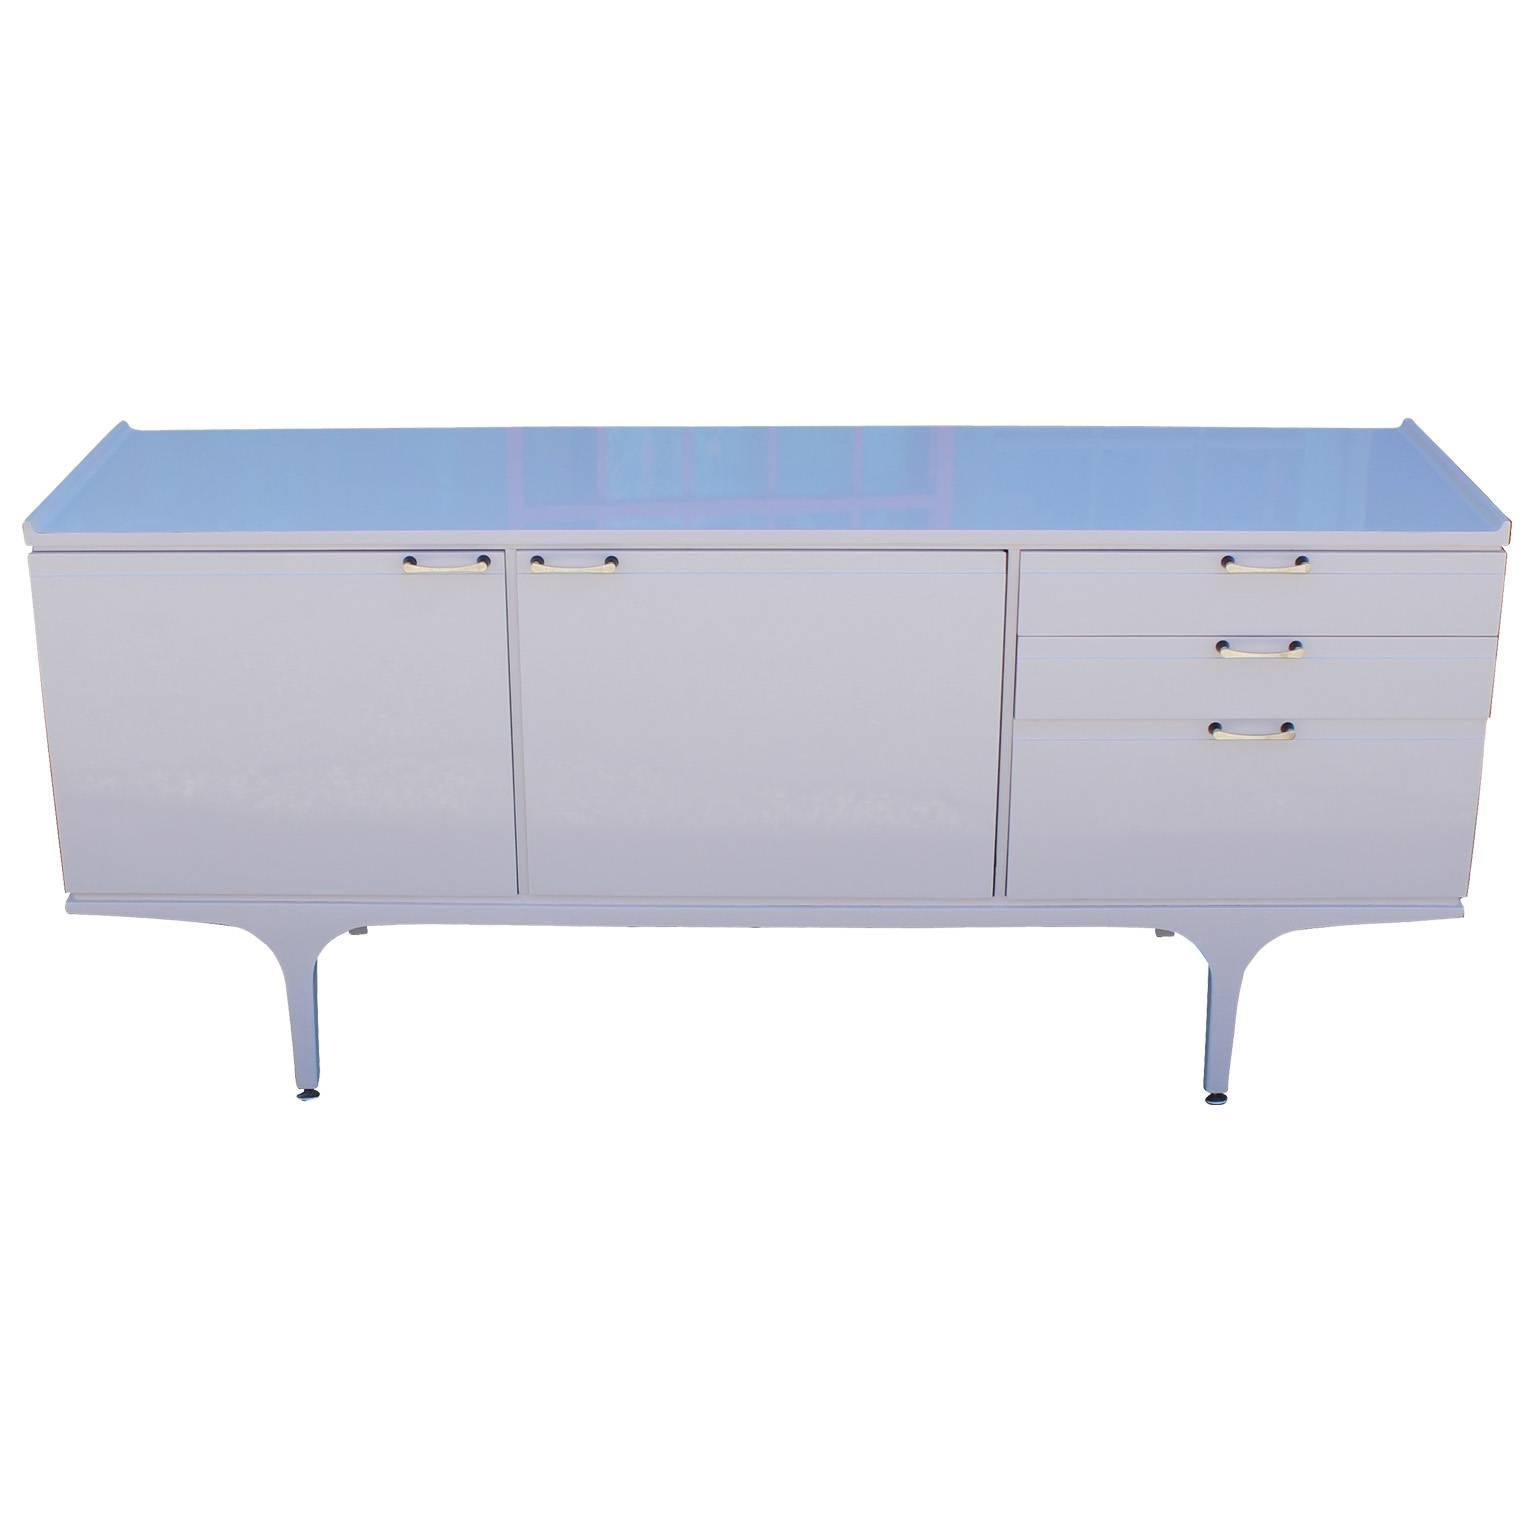 Ultra luxe credenza or sideboard expertly finished in a smooth and glossy pale lavender lacquer. Credenza has excellent lines with a curved lip on the top and curved legs. Chrome hardware with black accents. Two cabinet doors open to reveal single